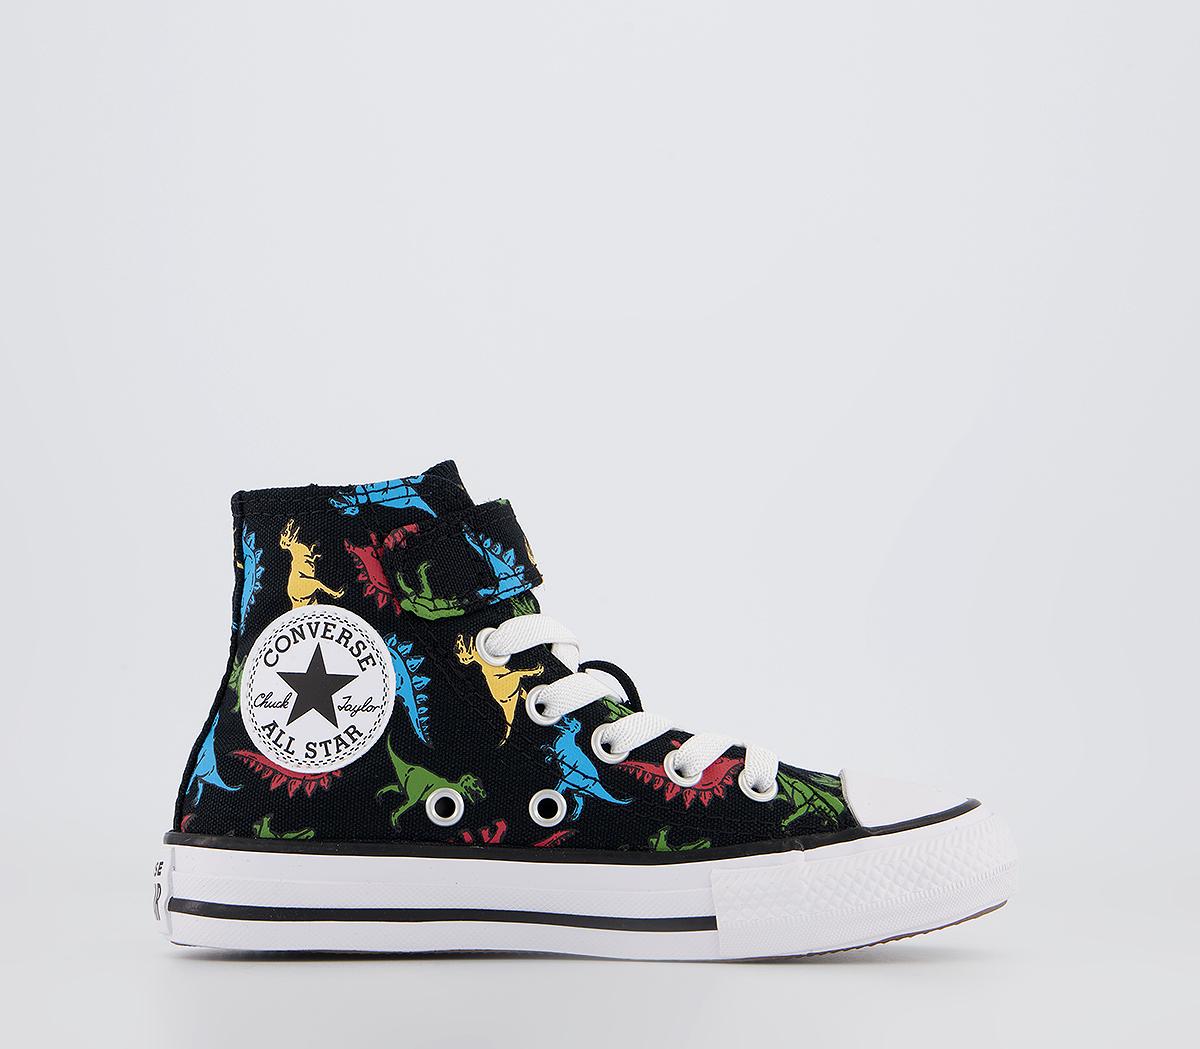 ConverseAll Star Hi 1vlace Kids TrainersDinosaurs Black Red Baltic Blue White